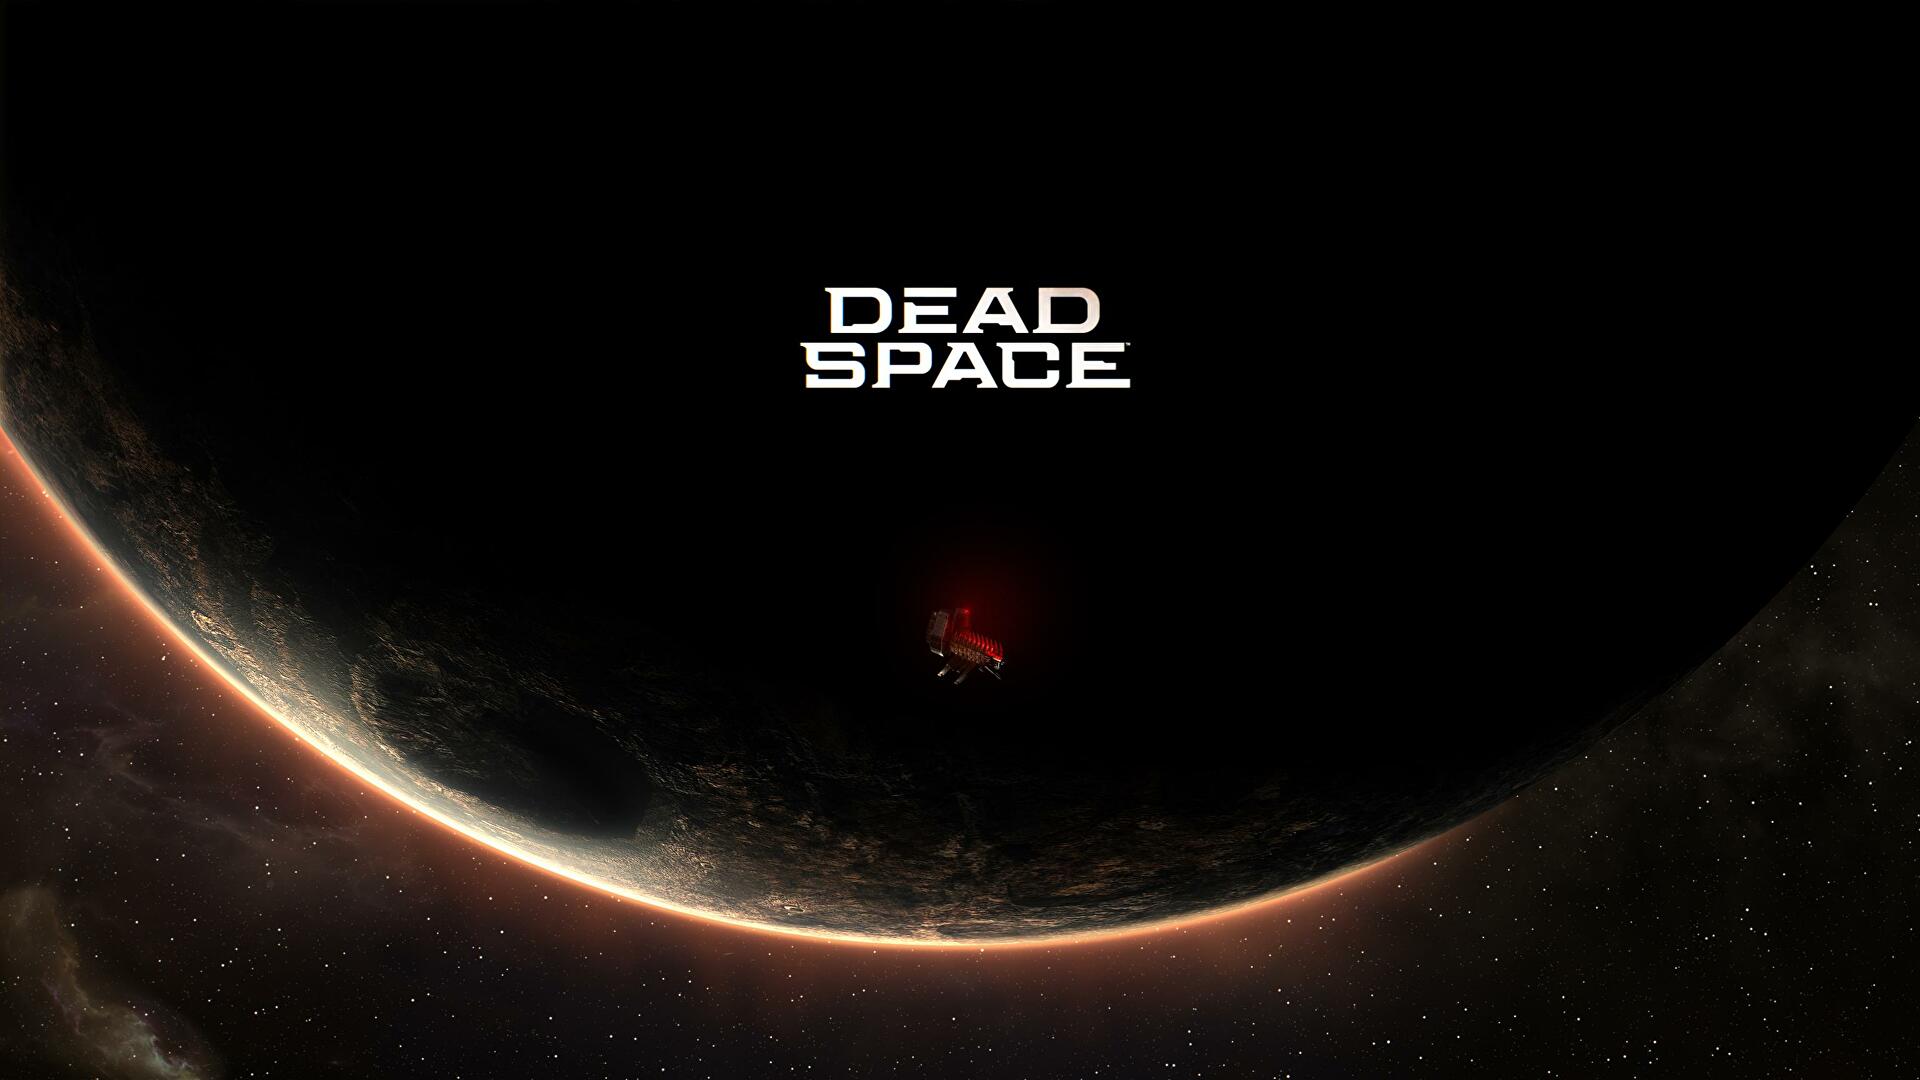 Watch the Dead Space remake gameplay reveal here today